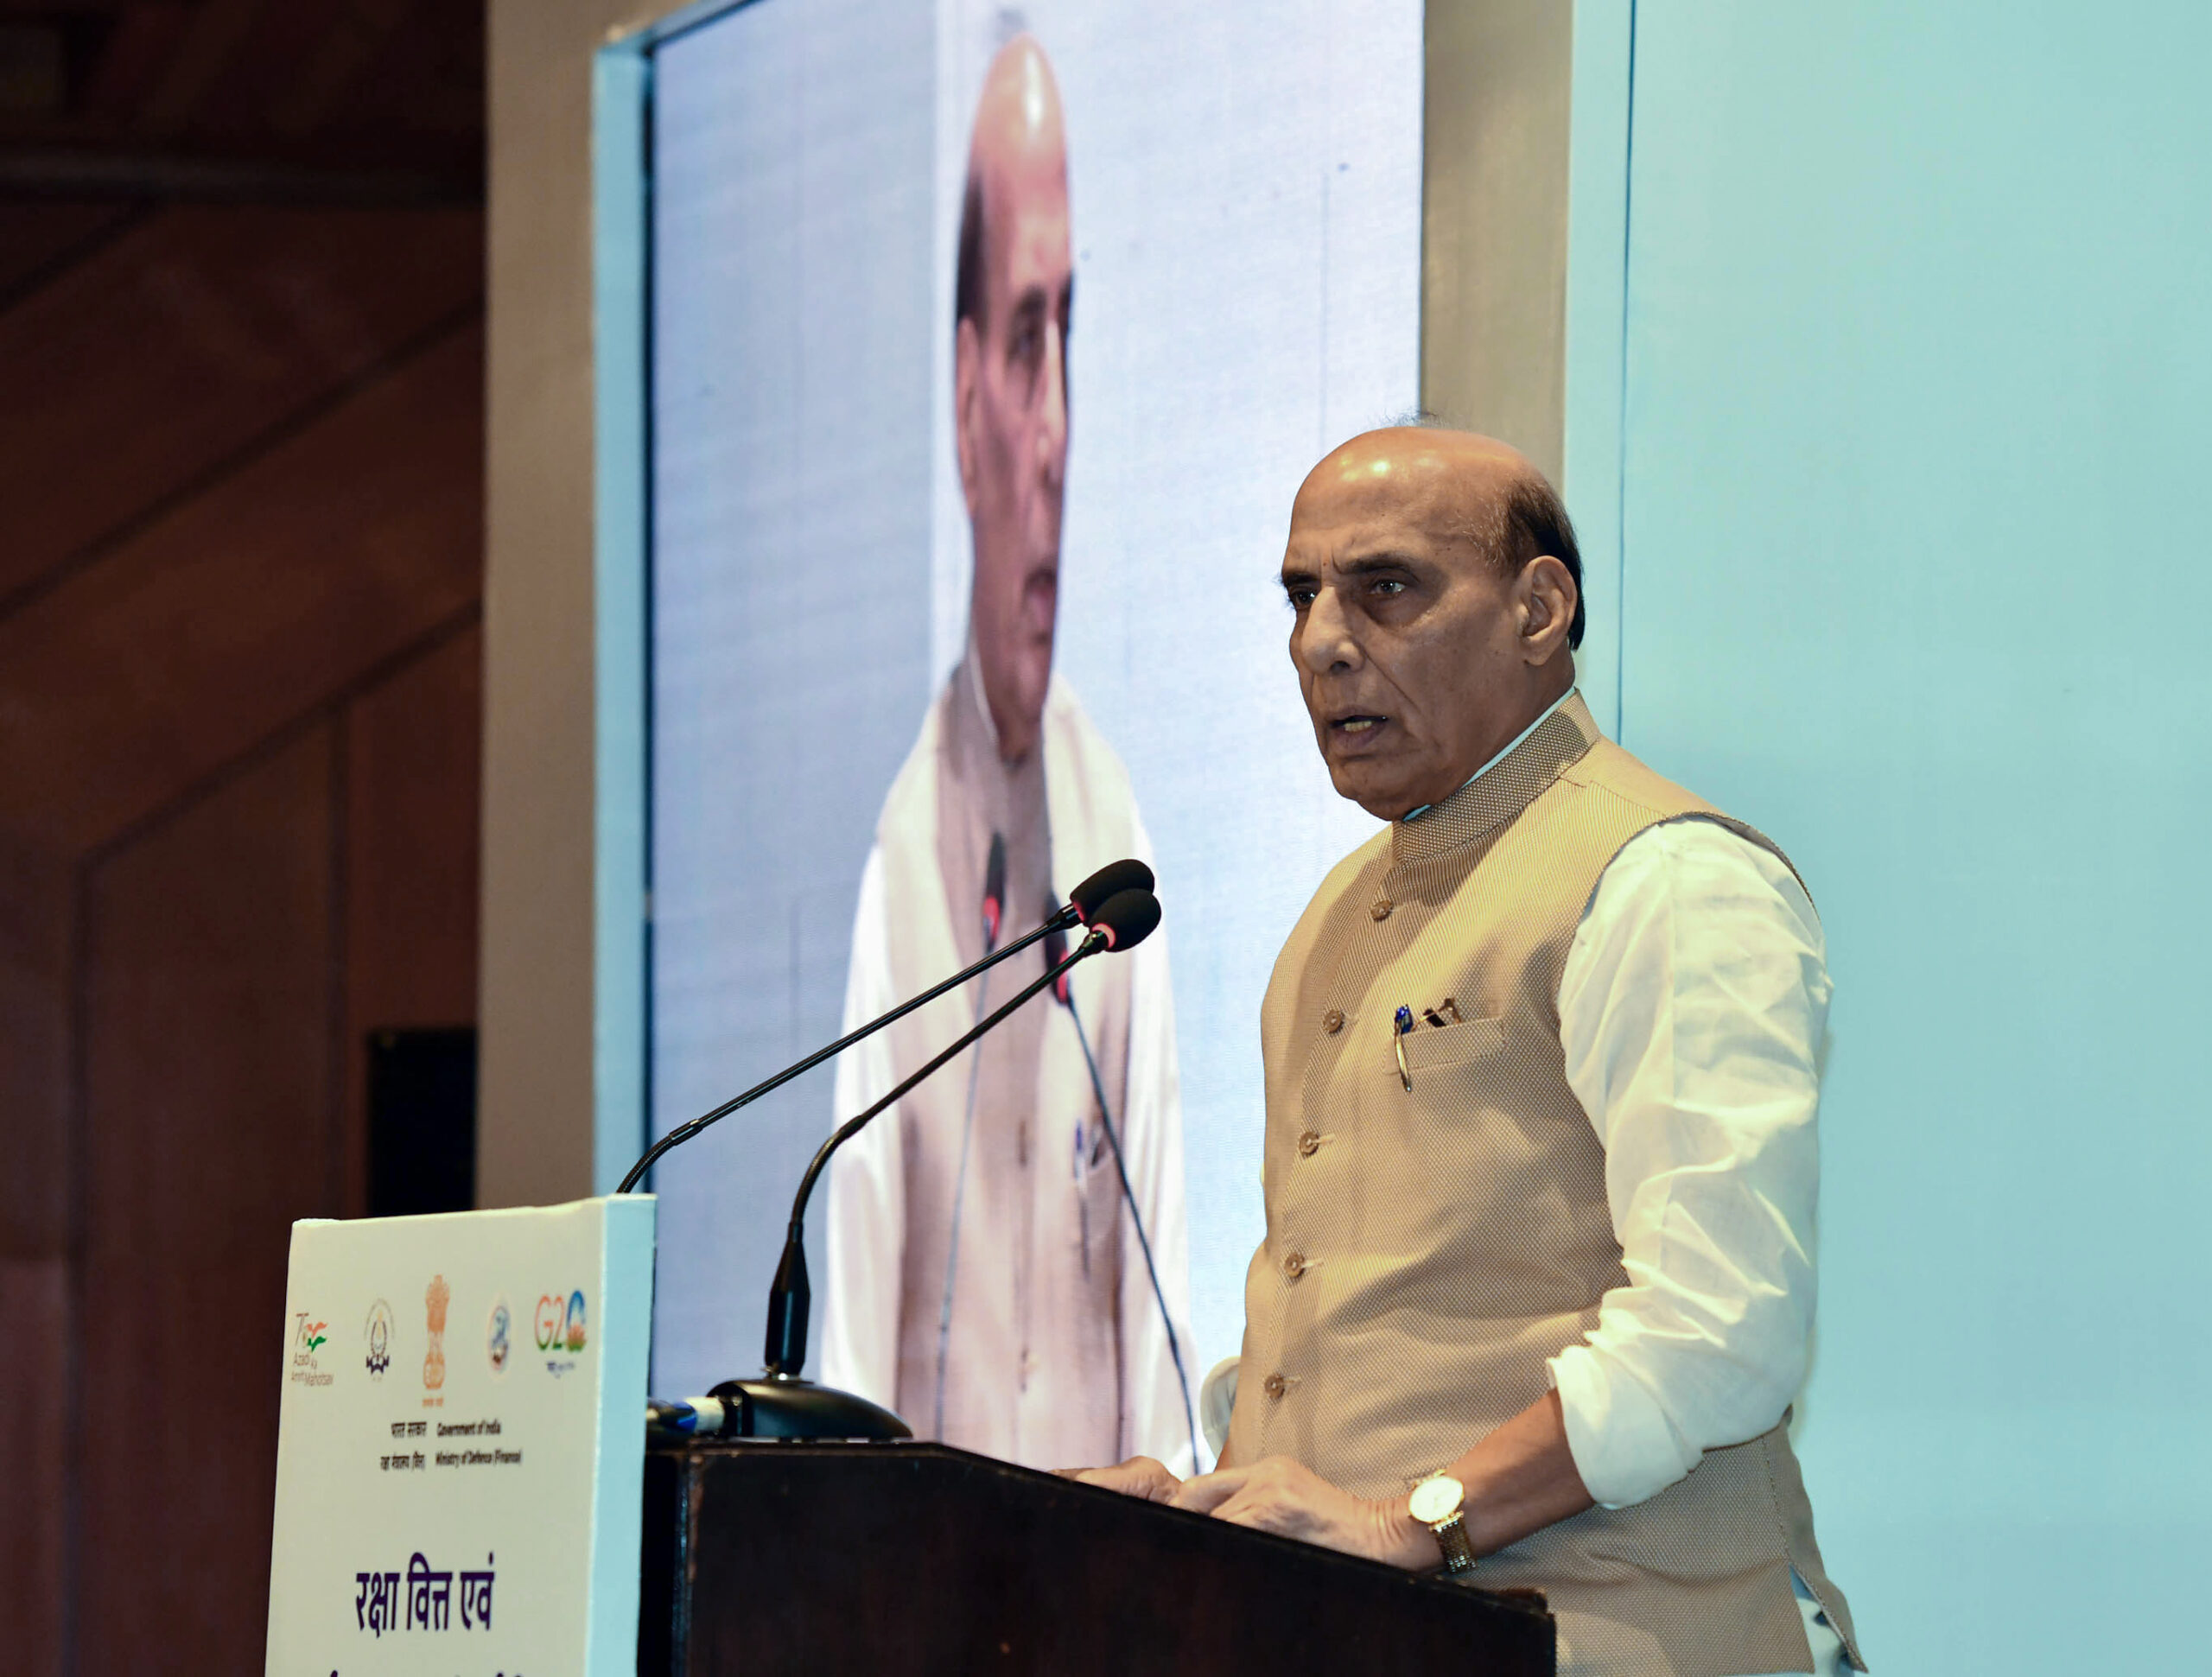 “Will work to strengthen cultural, civilizational links”: Rajnath Singh preside over the SCO Defence Ministers’ Meeting